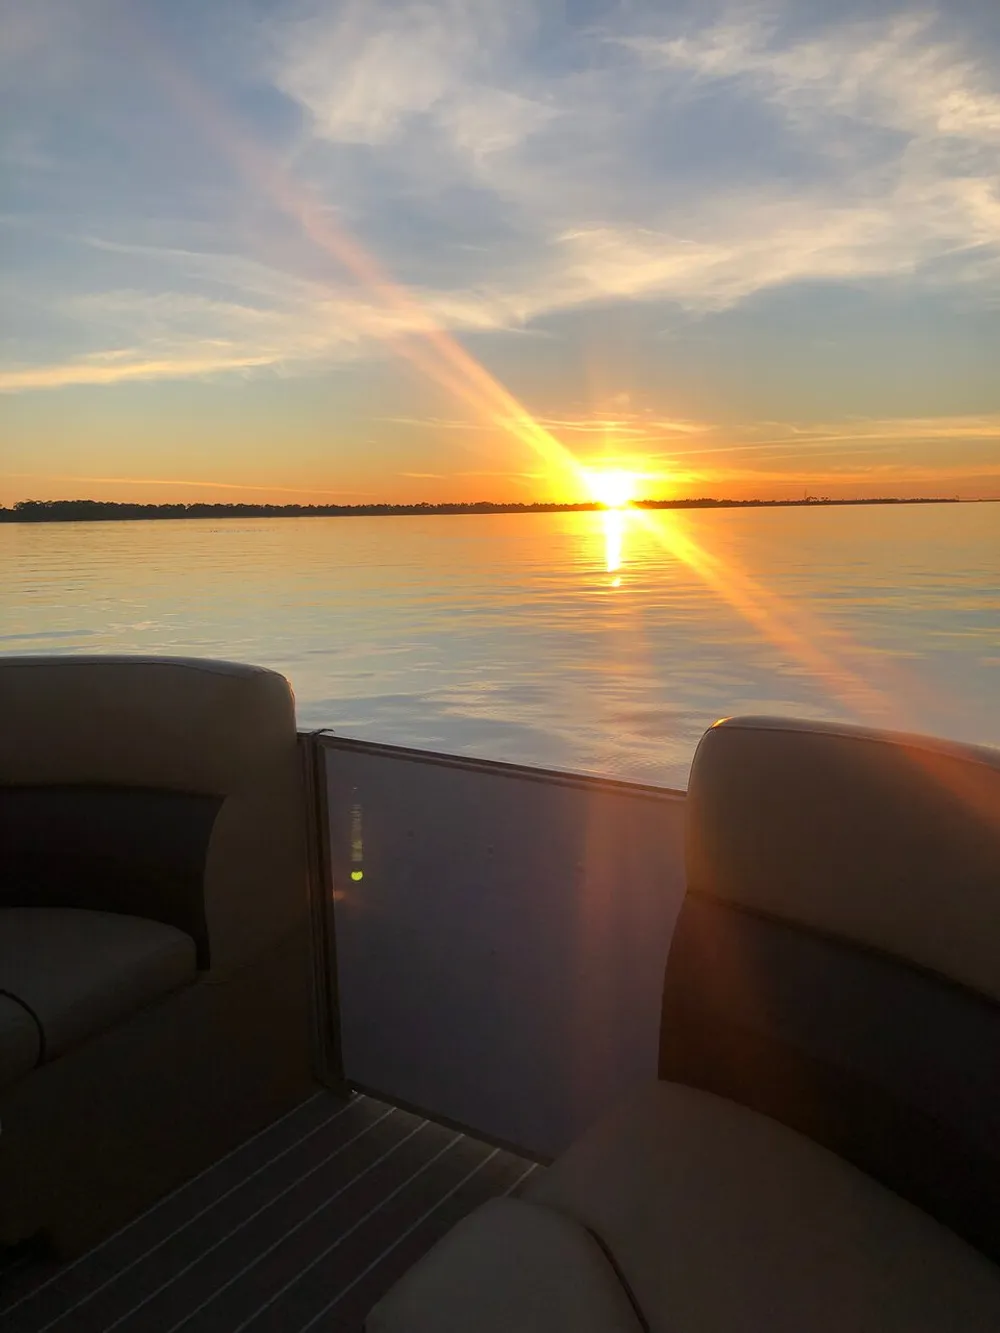 The image captures a tranquil sunset with radiant beams of light stretching across the sky viewed from the deck of a boat on a calm body of water